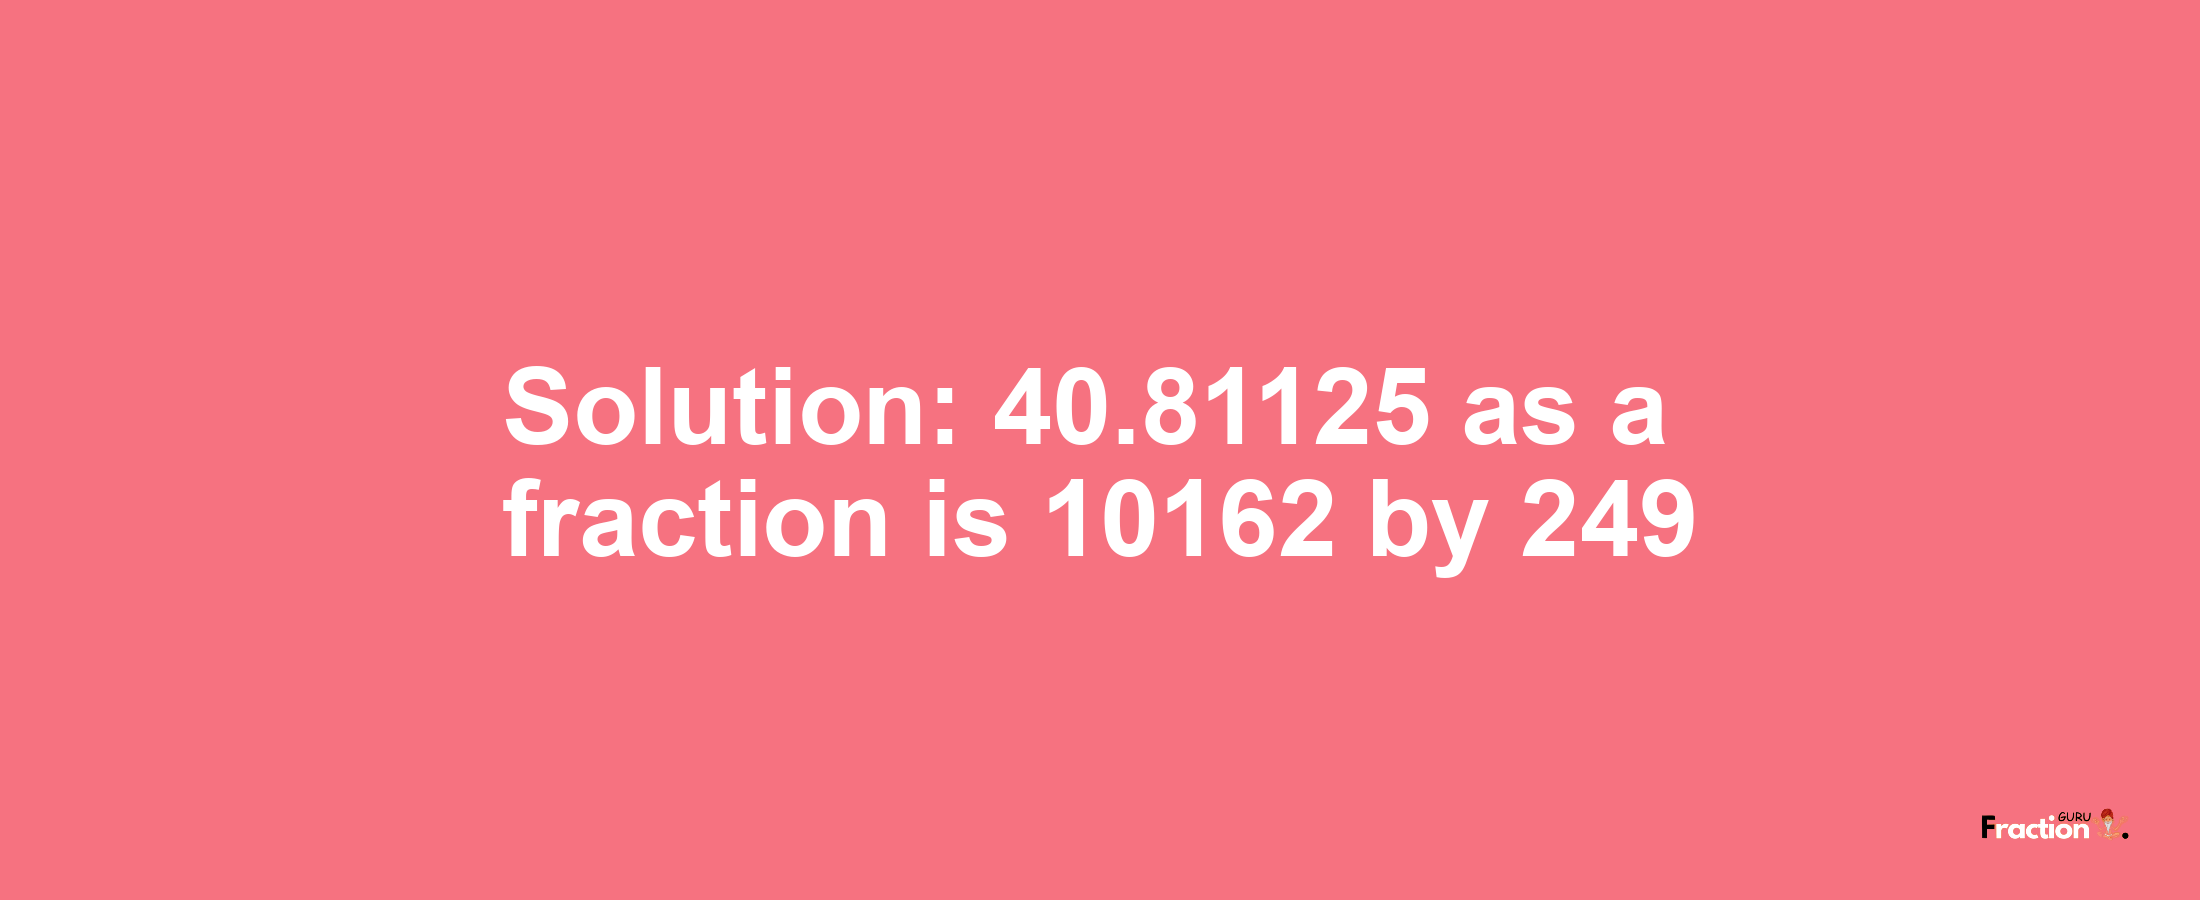 Solution:40.81125 as a fraction is 10162/249